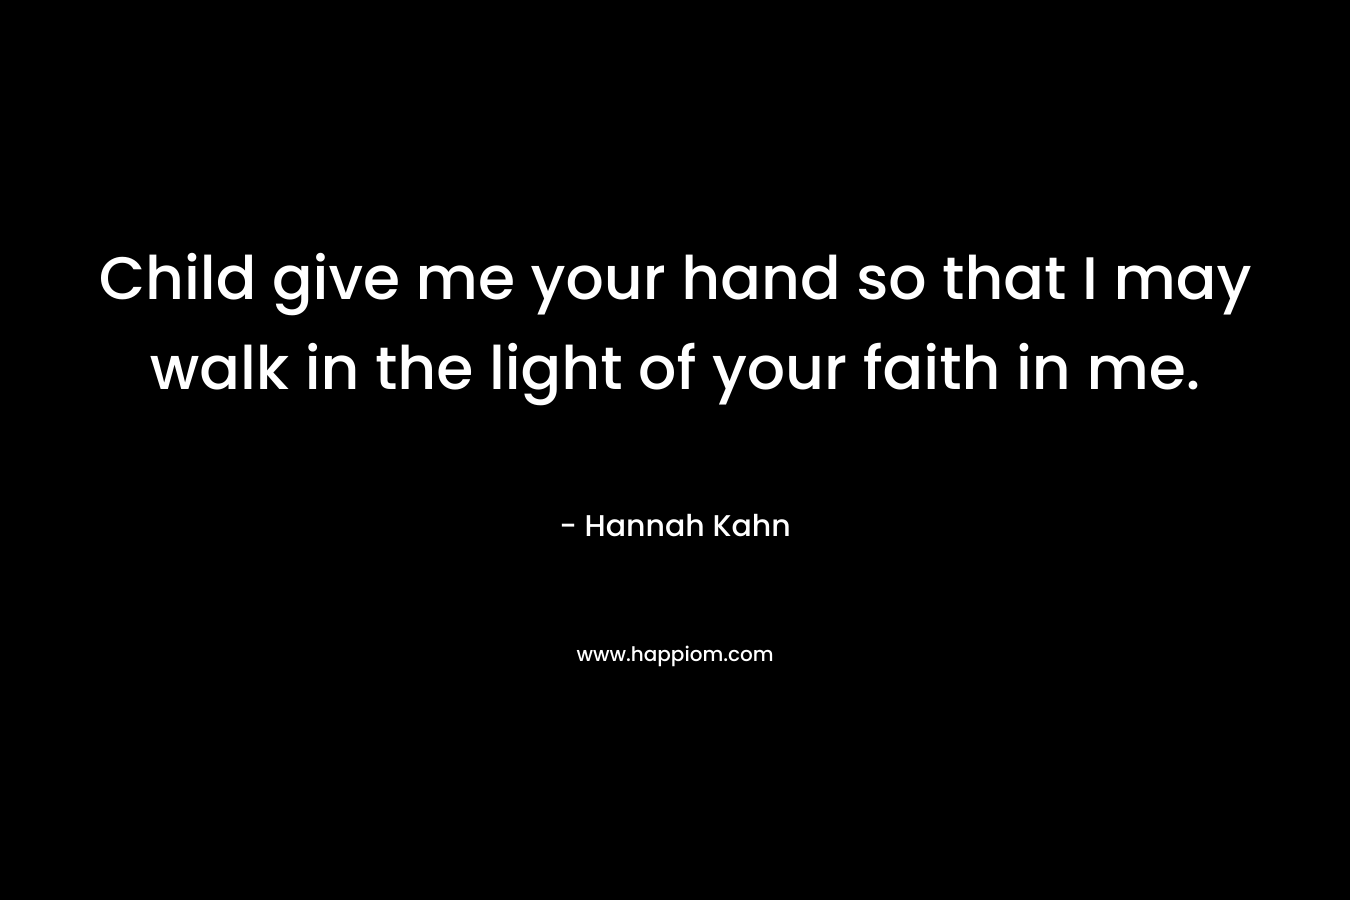 Child give me your hand so that I may walk in the light of your faith in me.